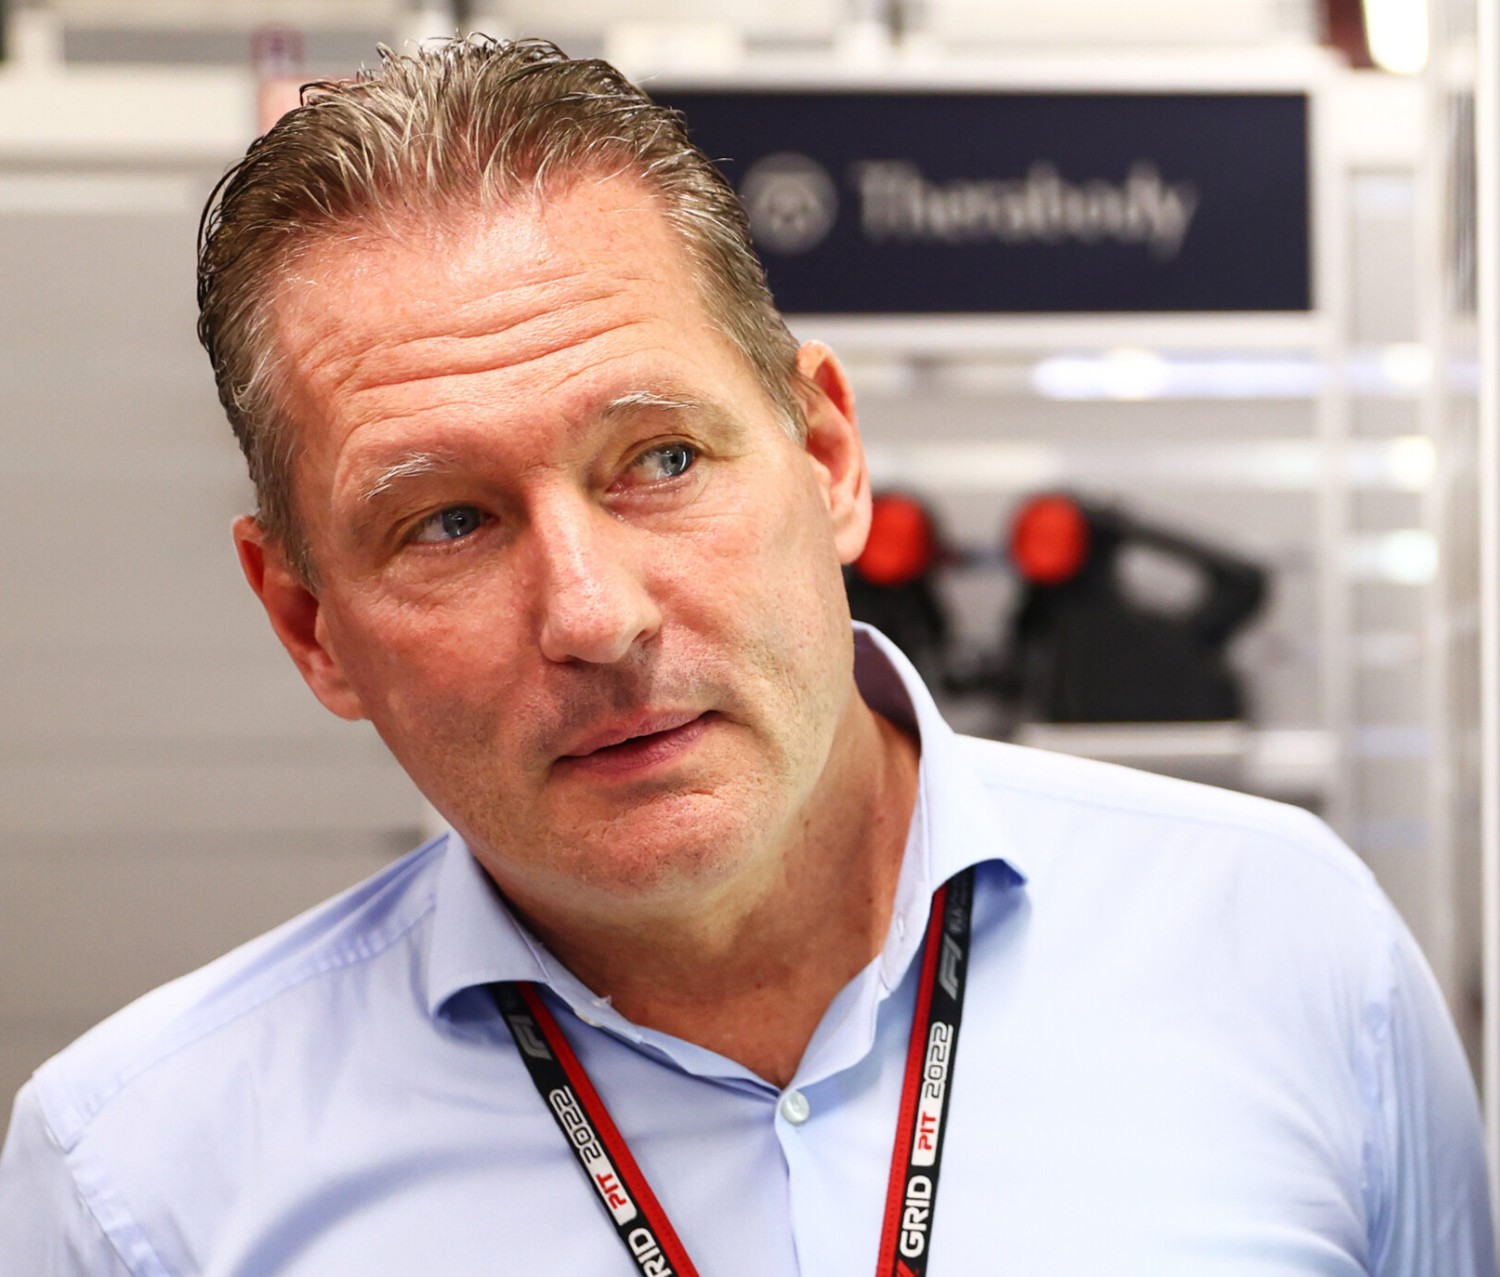 Jos Verstappen looks on in the Red Bull Racing garage prior to the F1 Grand Prix of Singapore at Marina Bay Street Circuit on October 02, 2022 in Singapore, Singapore. (Photo by Mark Thompson/Getty Images,) // Getty Images / Red Bull Content Pool